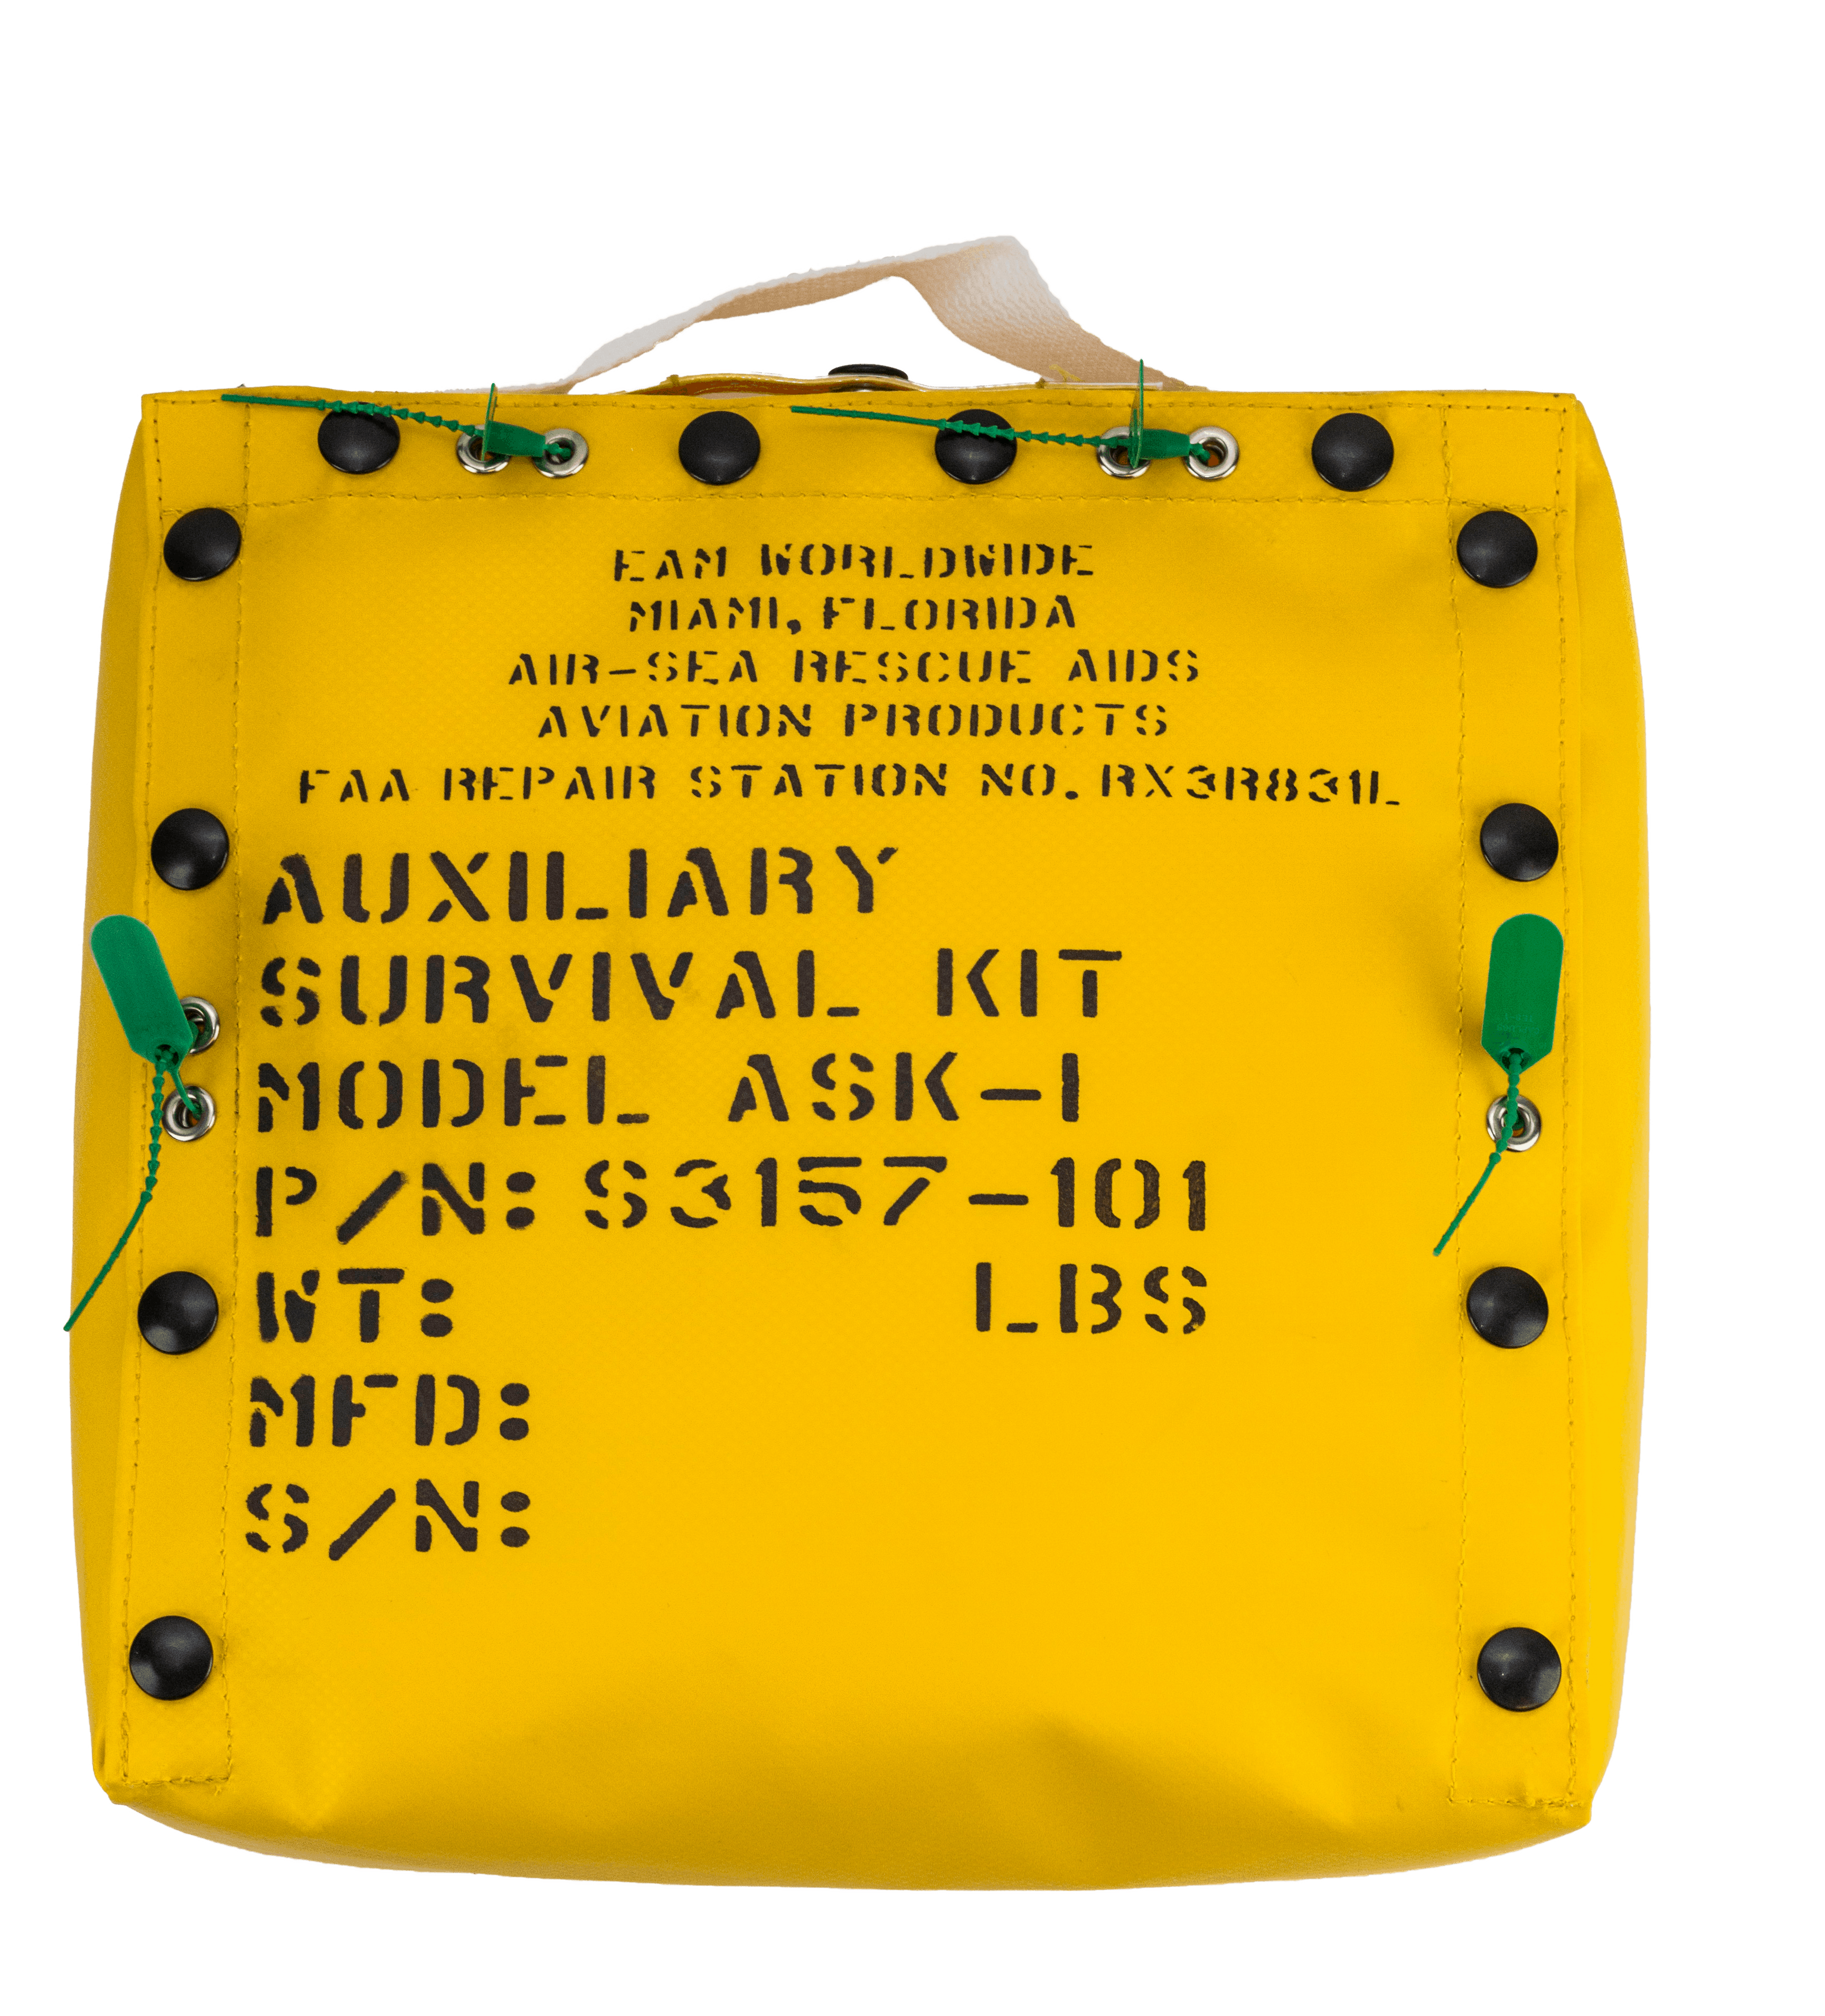 eam auxiliary survival kit